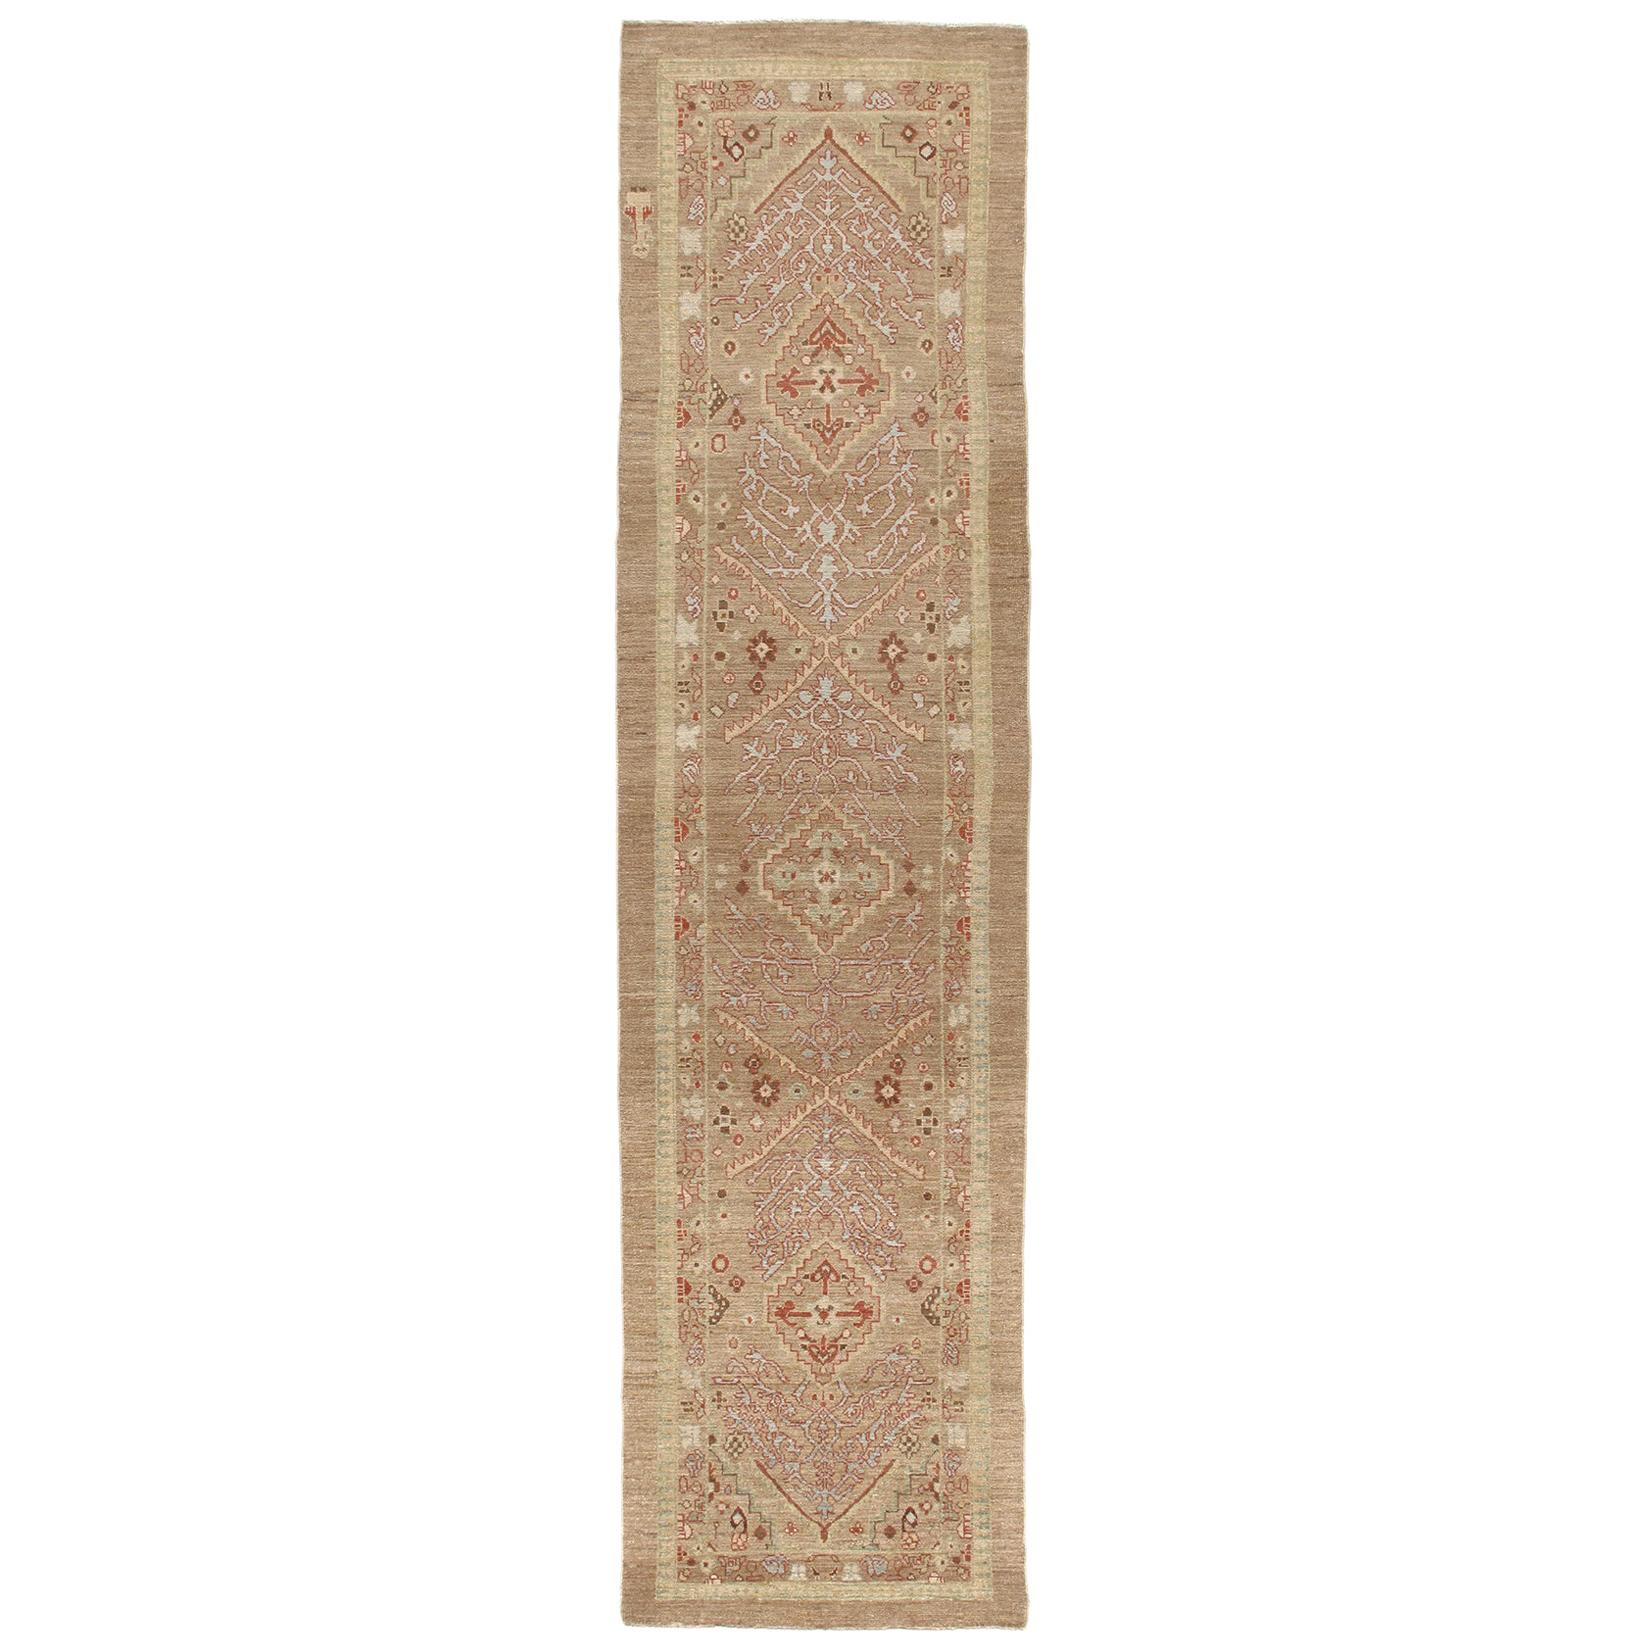 Persian Traditional Kurdish Handknotted Runner Rug in Camel and Rust Colors